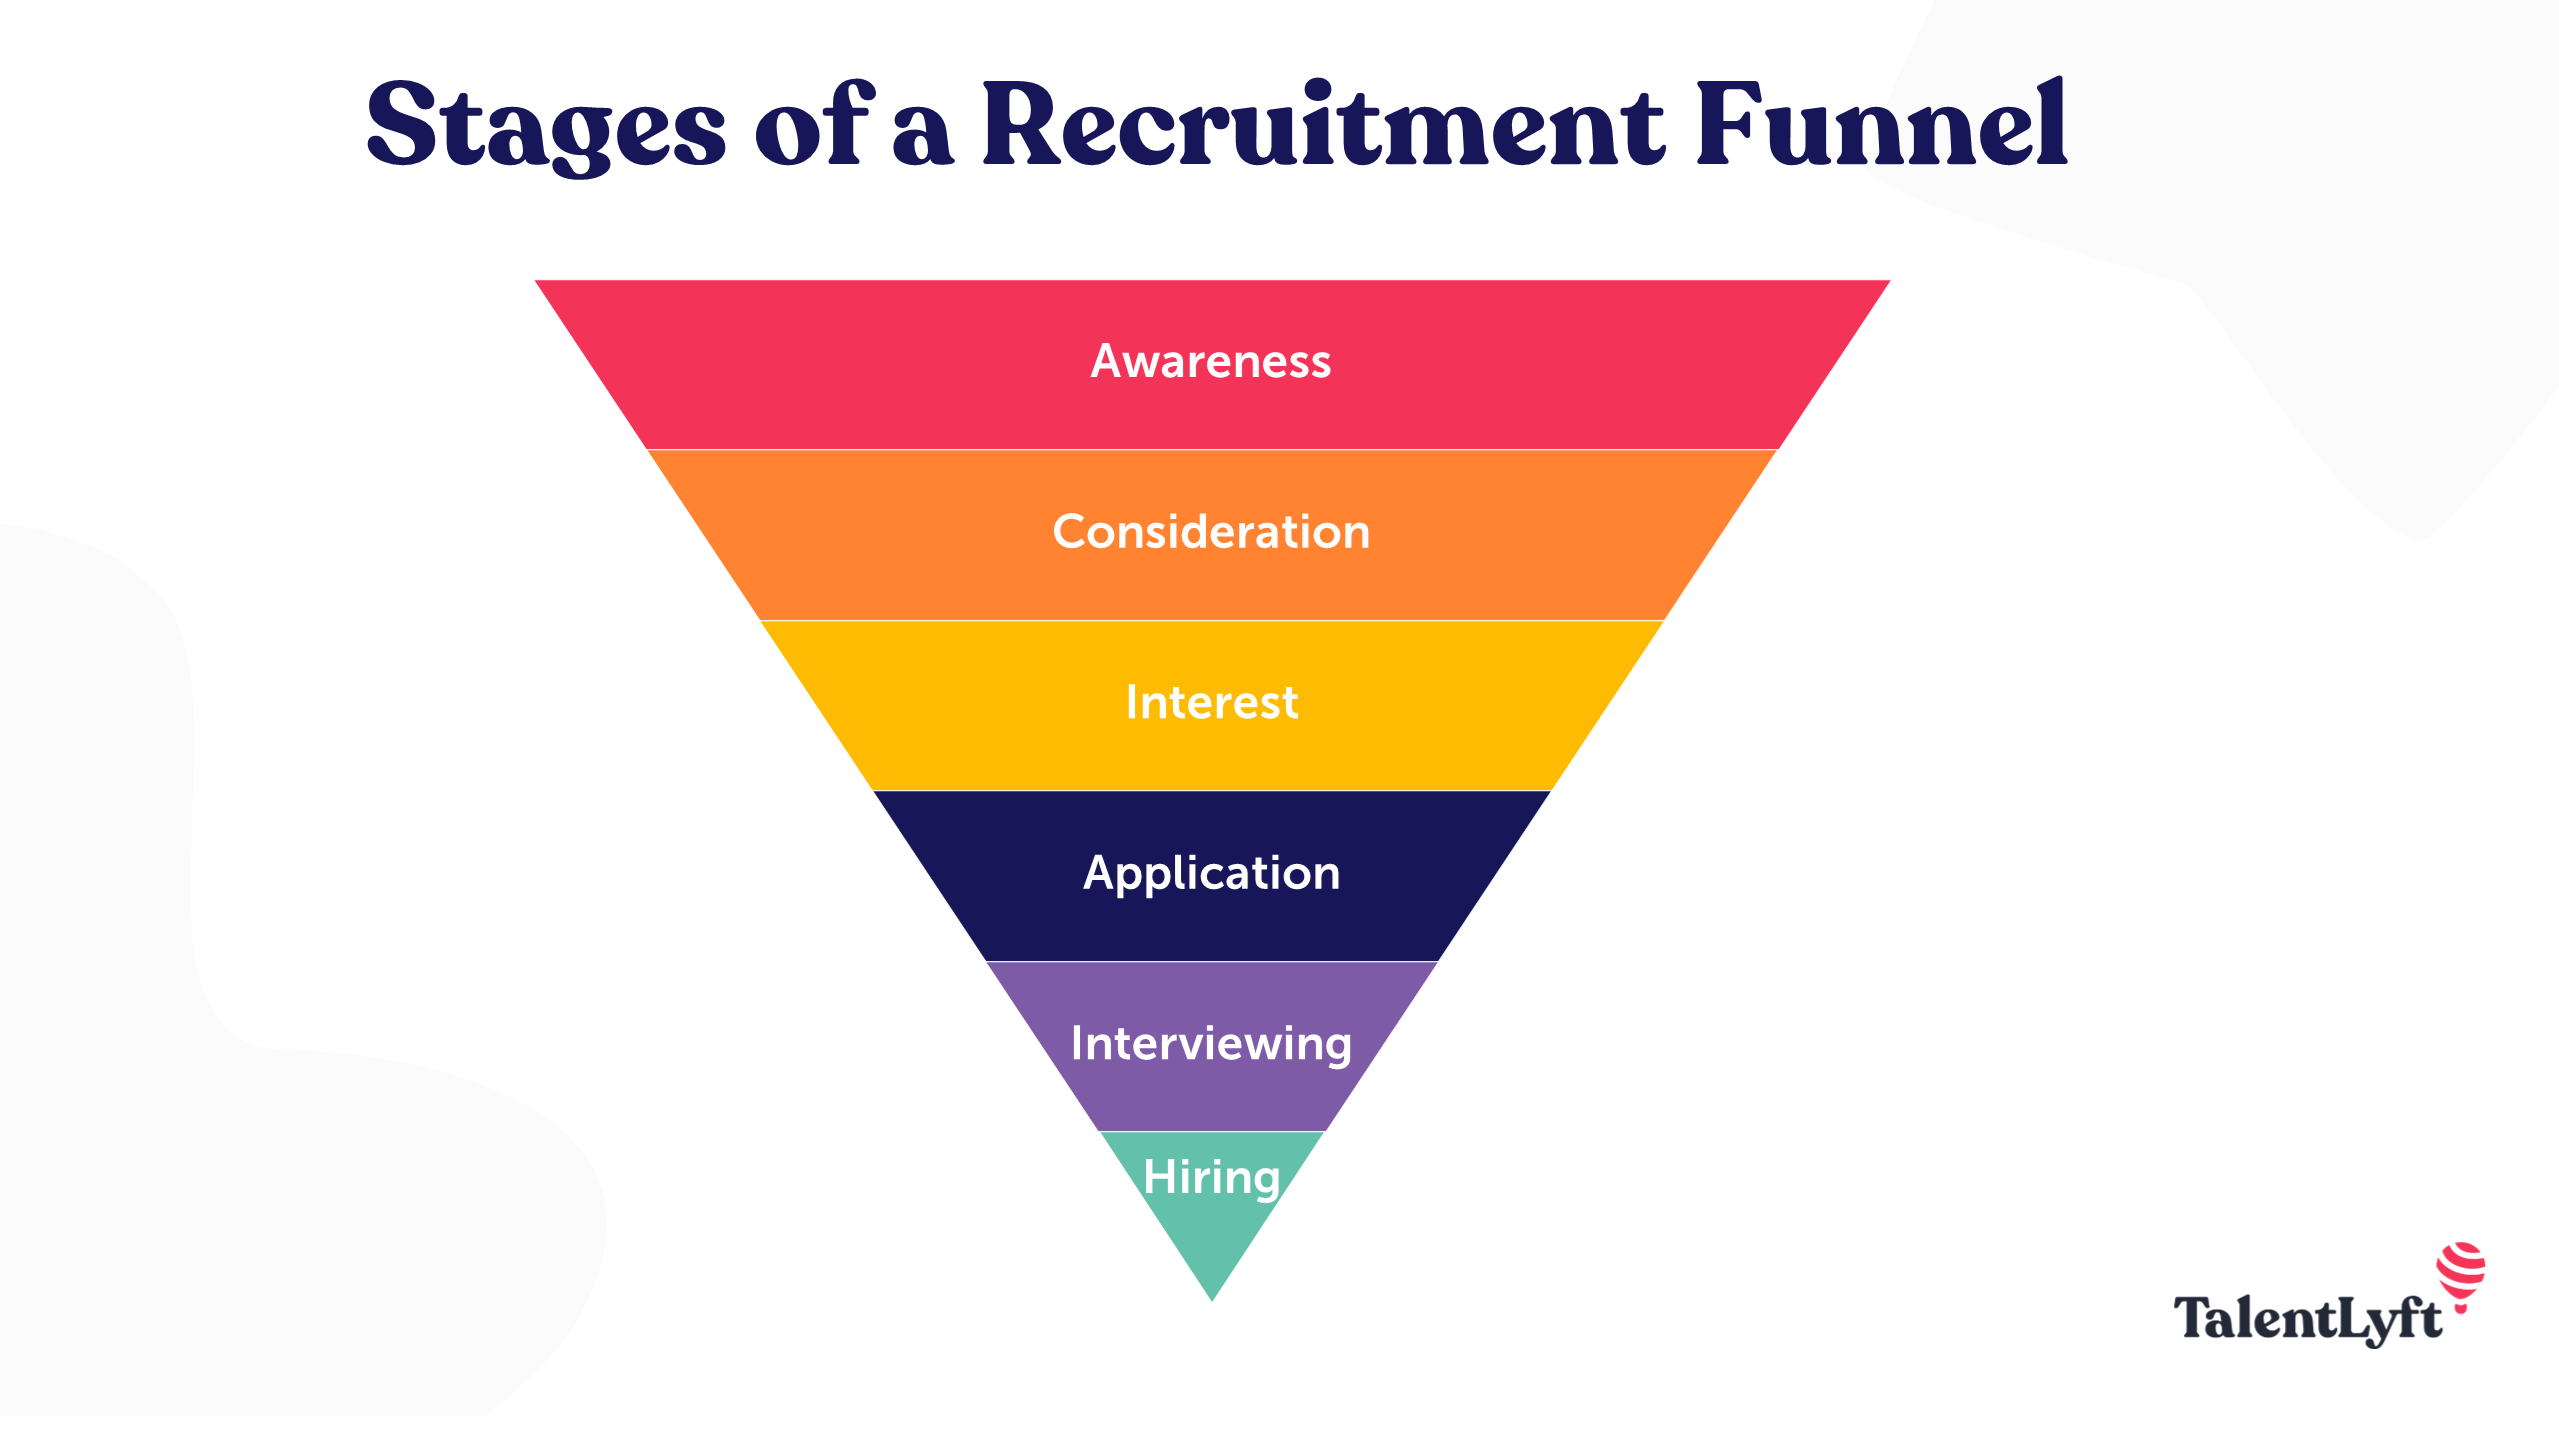 Stages of a recruitment funnel